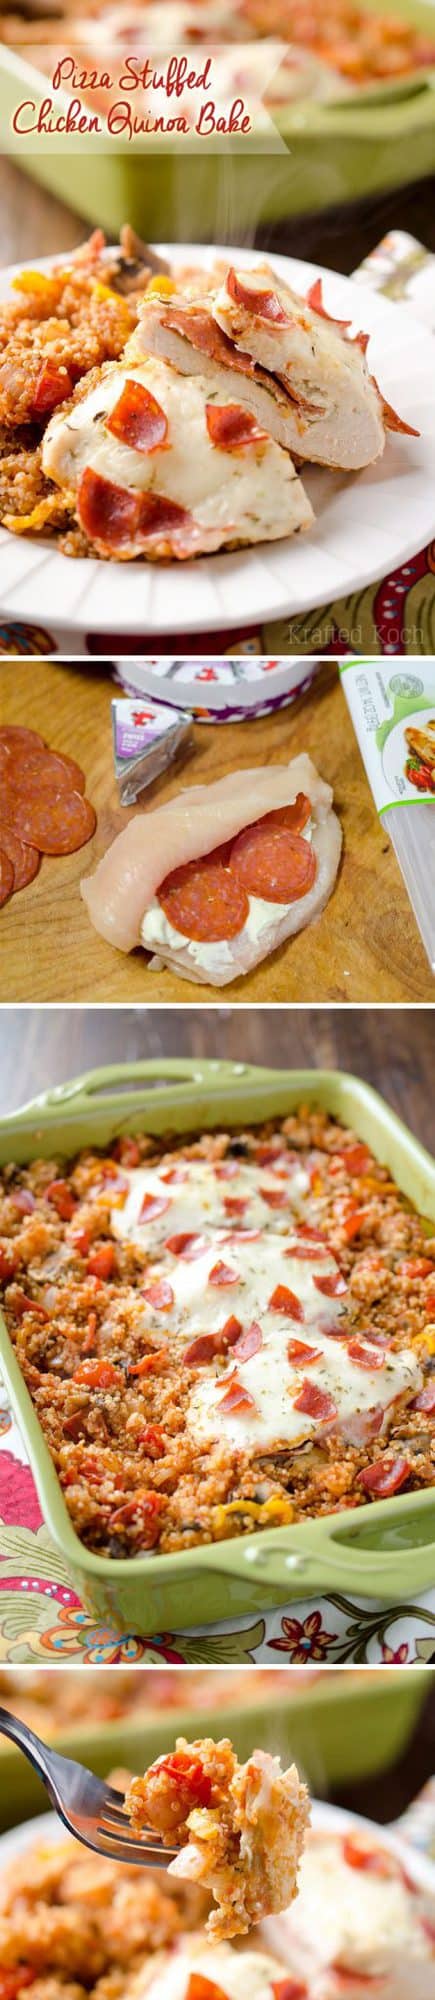 Pizza Stuffed Chicken Quinoa Bake - Krafted Koch - A hearty but healthy casserole filled with fluffy quinoa and your favorite pizza toppings along with garlic herb cheese and pepperoni stuffed chicken breasts for a dinner recipe the whole family will love! #Healthy #Light #Quinoa #DinnerIdea #Casserole #Pizza